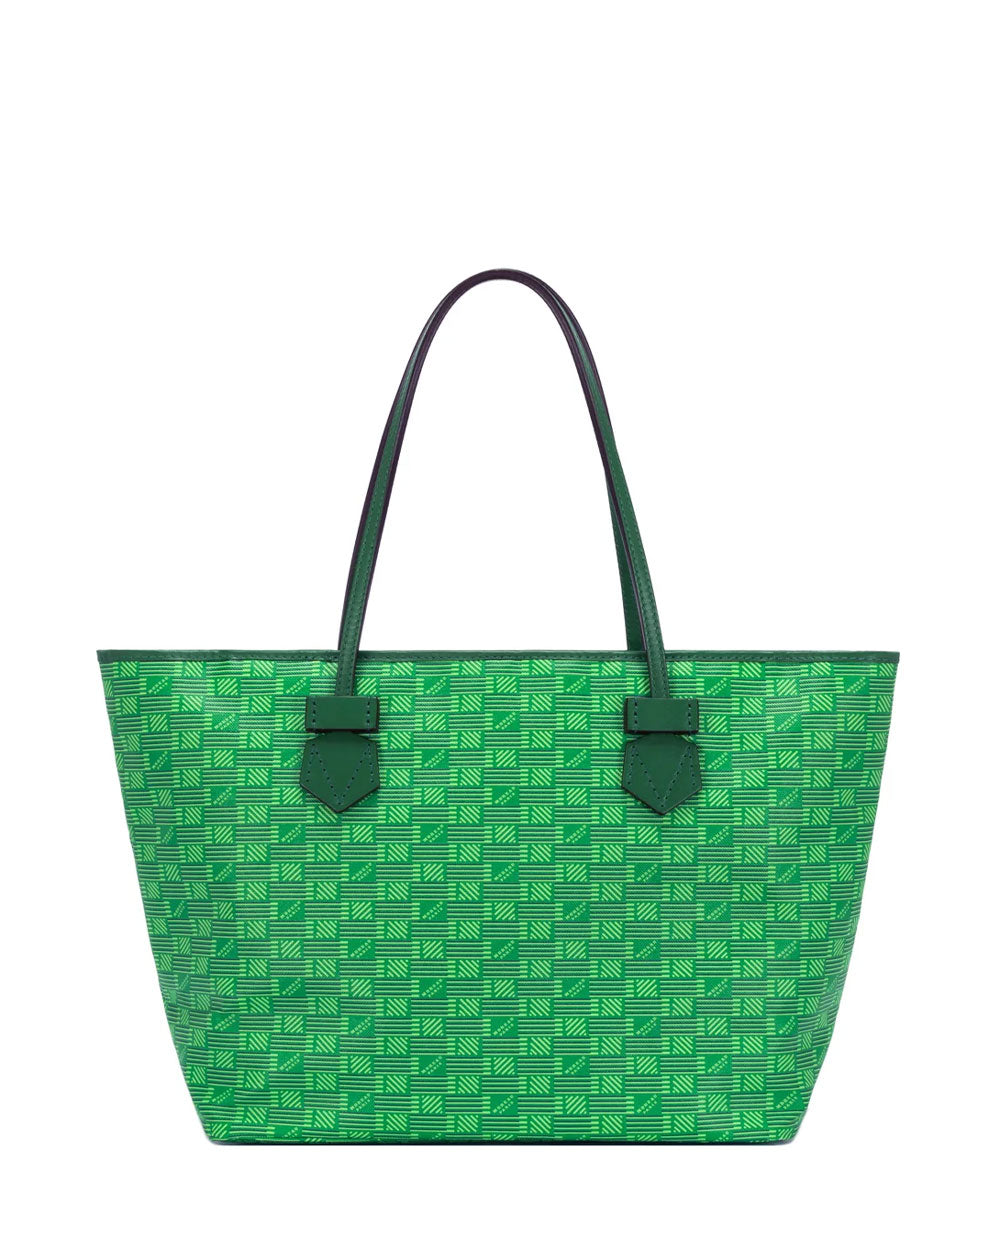 St Tropez Tote in Green